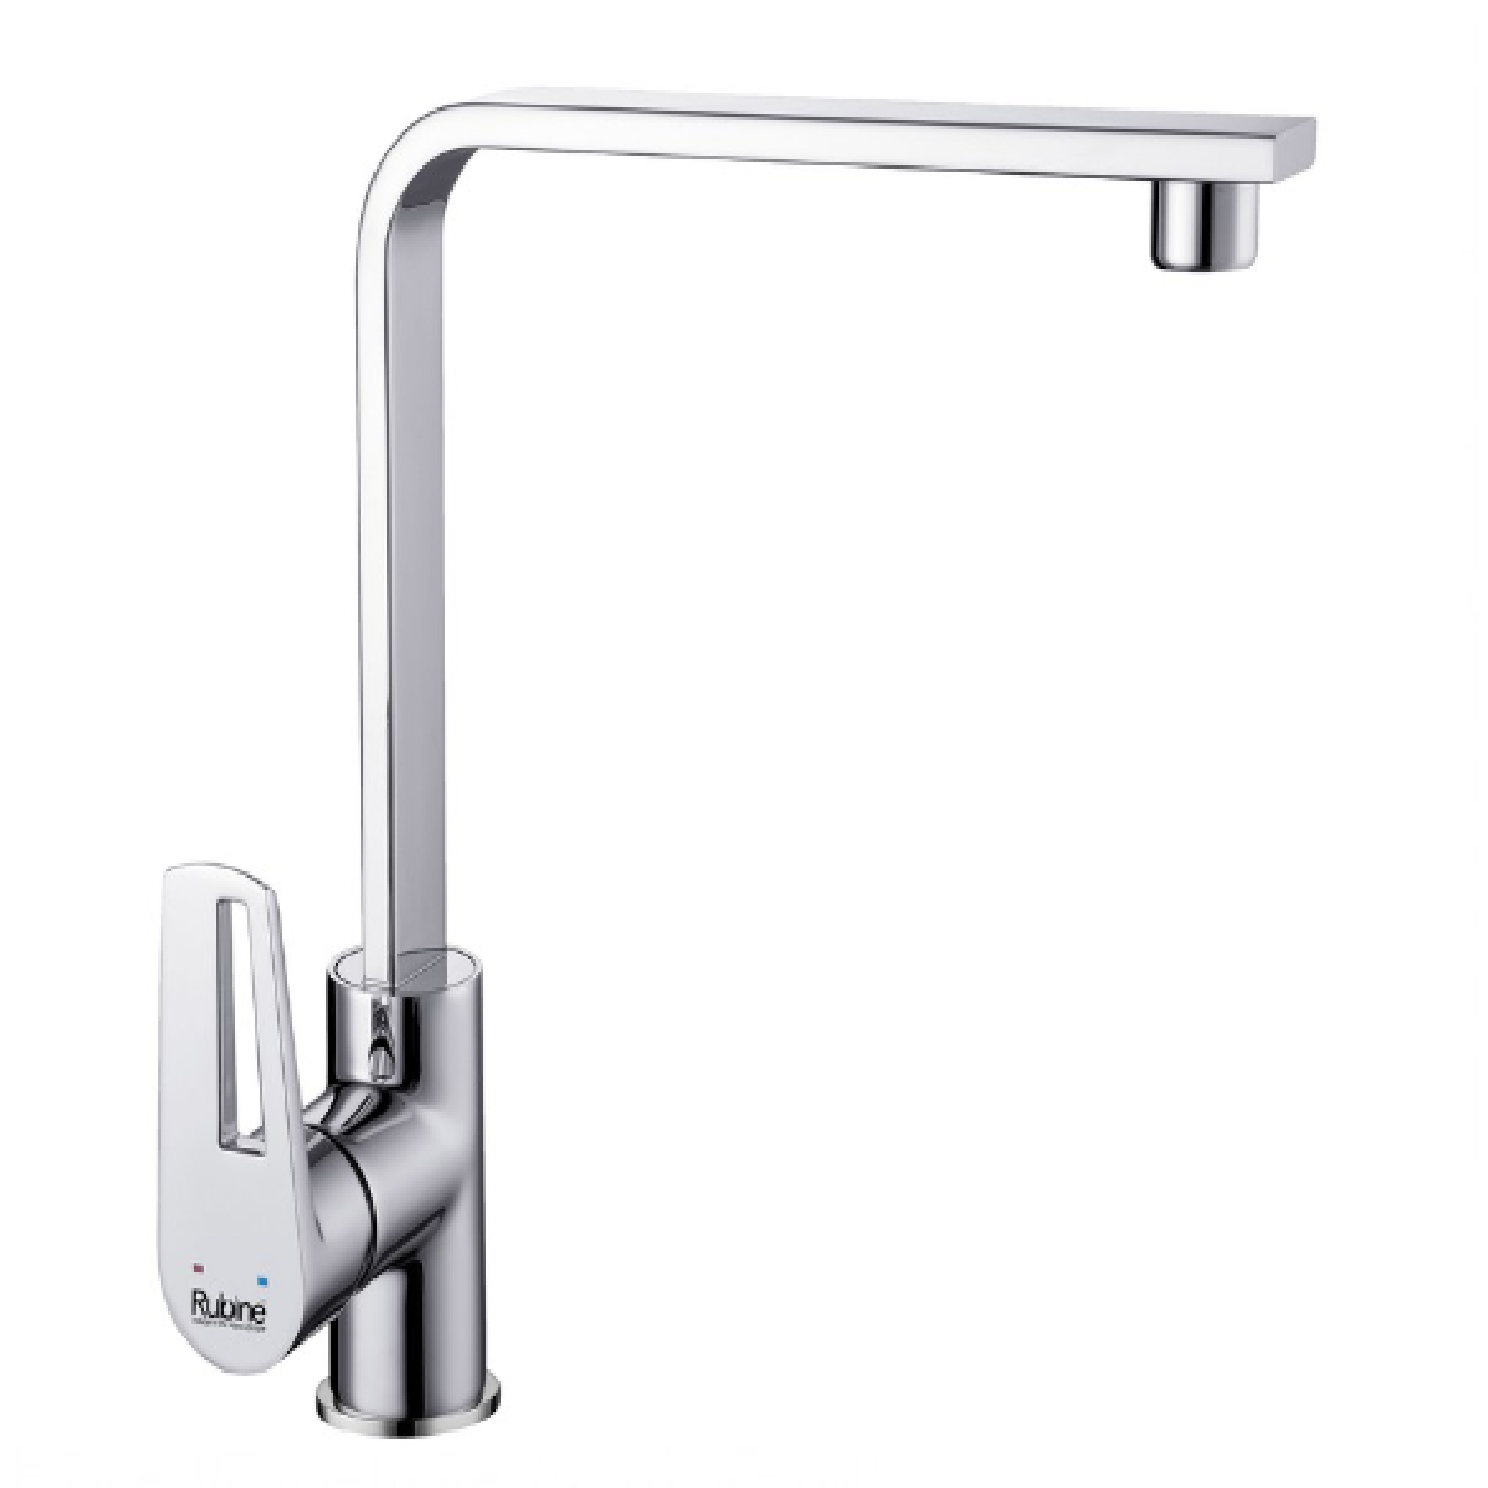 Rubine Kitchen SINK MIXER Tap Hot & Cold STYLO H9144